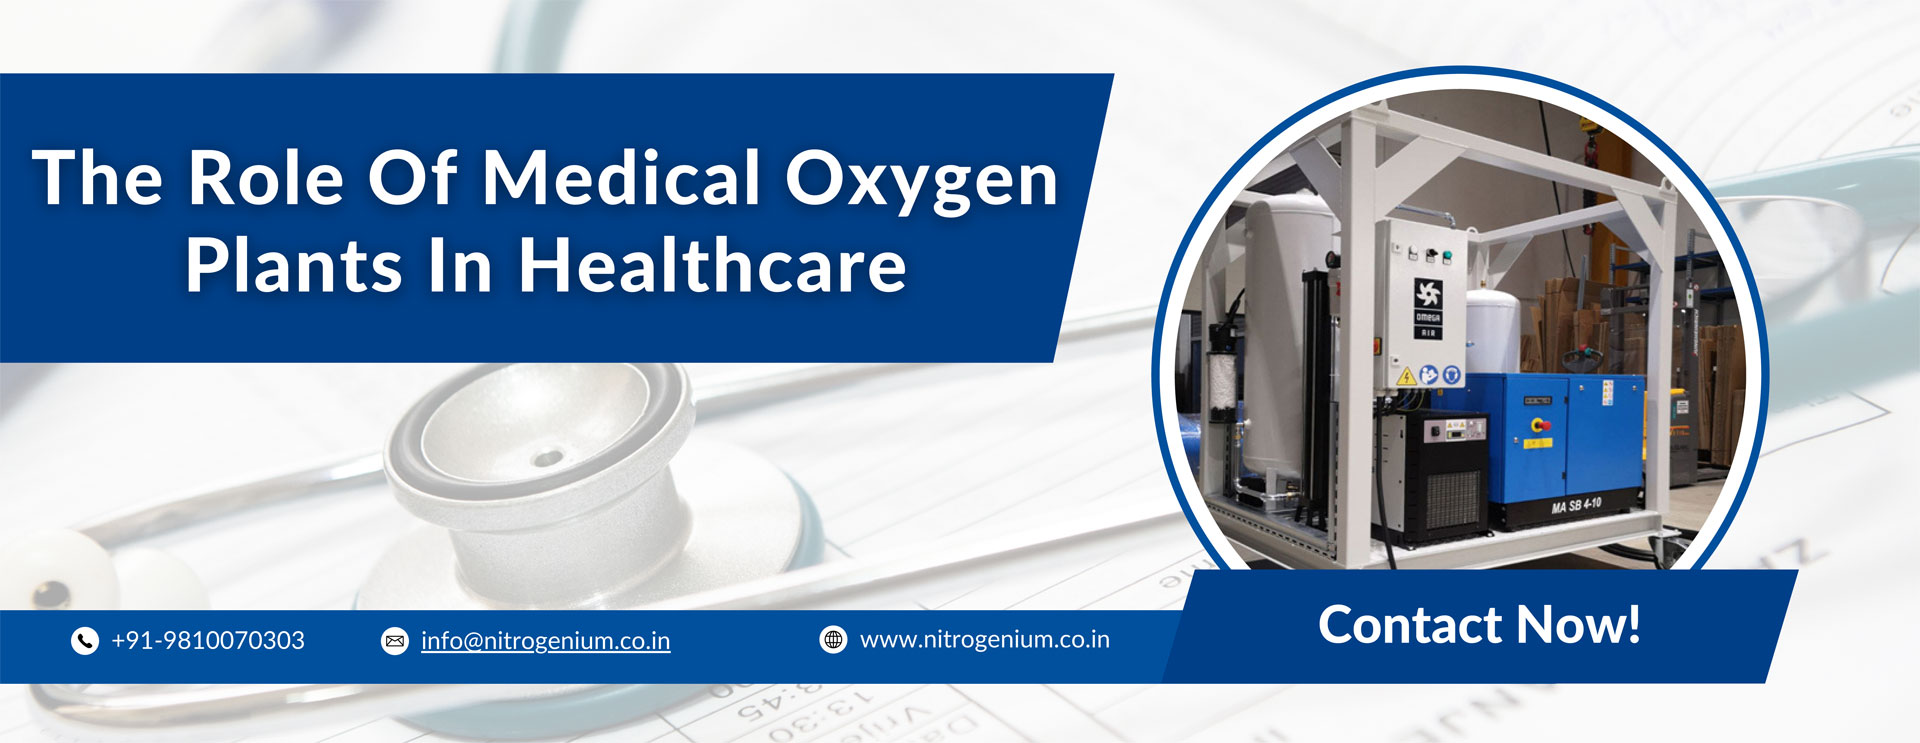 The Role Of Medical Oxygen Plants In Healthcare